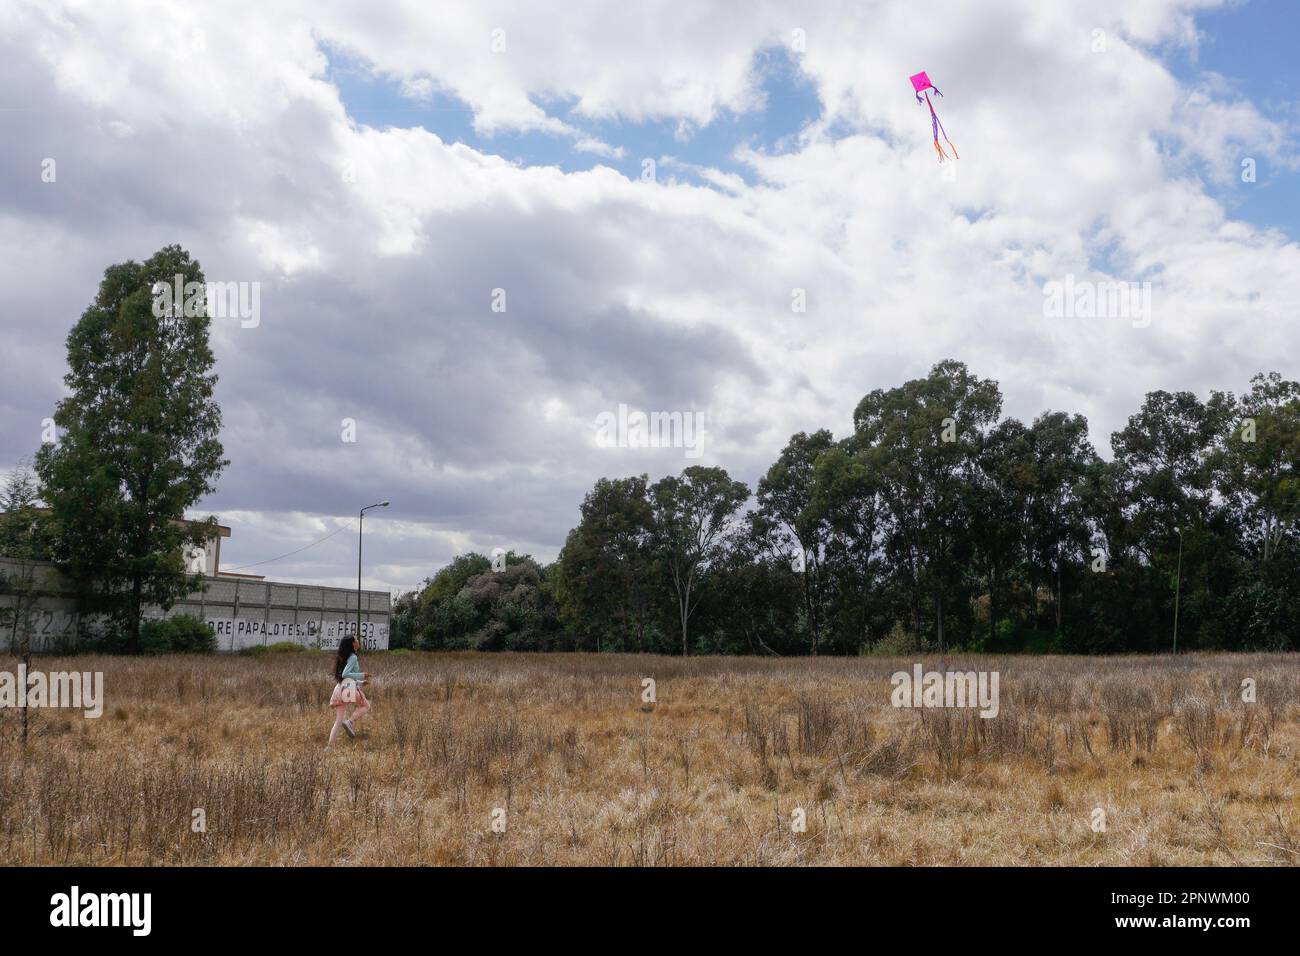 Camila Jahdai Nava Adame, 12, flies a kite during Free Wind, a ceremony to honor Ehécatl Quetzalcoátl, a god of wind, at Jagüey Zoquiaqui, a protected cultural site in Puebla, Mexico on February 13, 2022. (Patricia Zavala Gutiérrez/Global Press Journal) Stock Photo